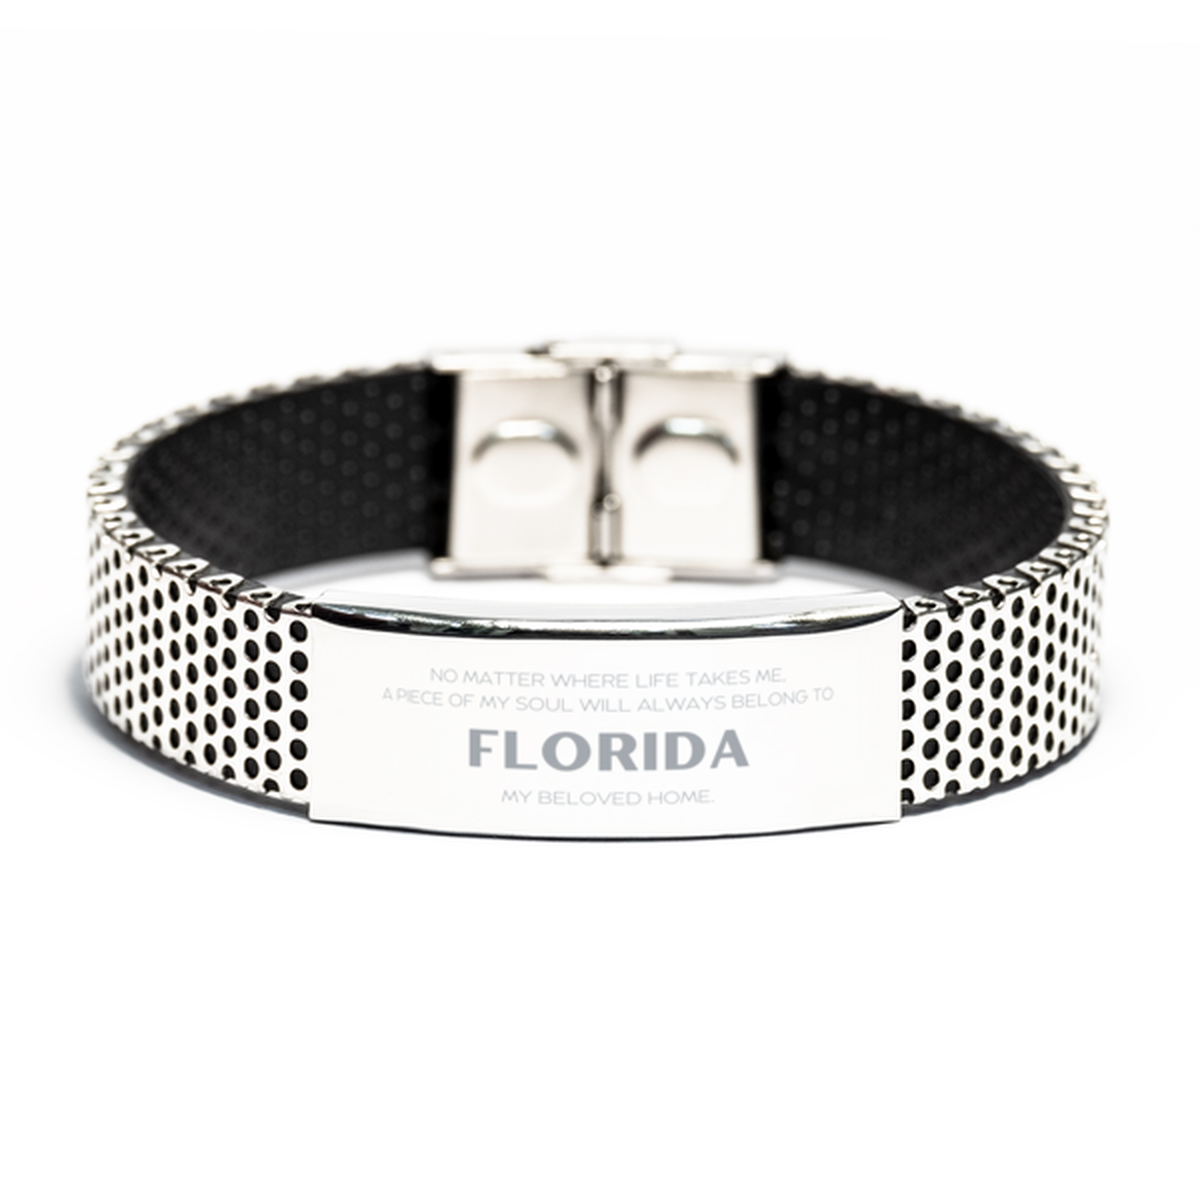 Love Florida State Gifts, My soul will always belong to Florida, Proud Stainless Steel Bracelet, Birthday Unique Gifts For Florida Men, Women, Friends